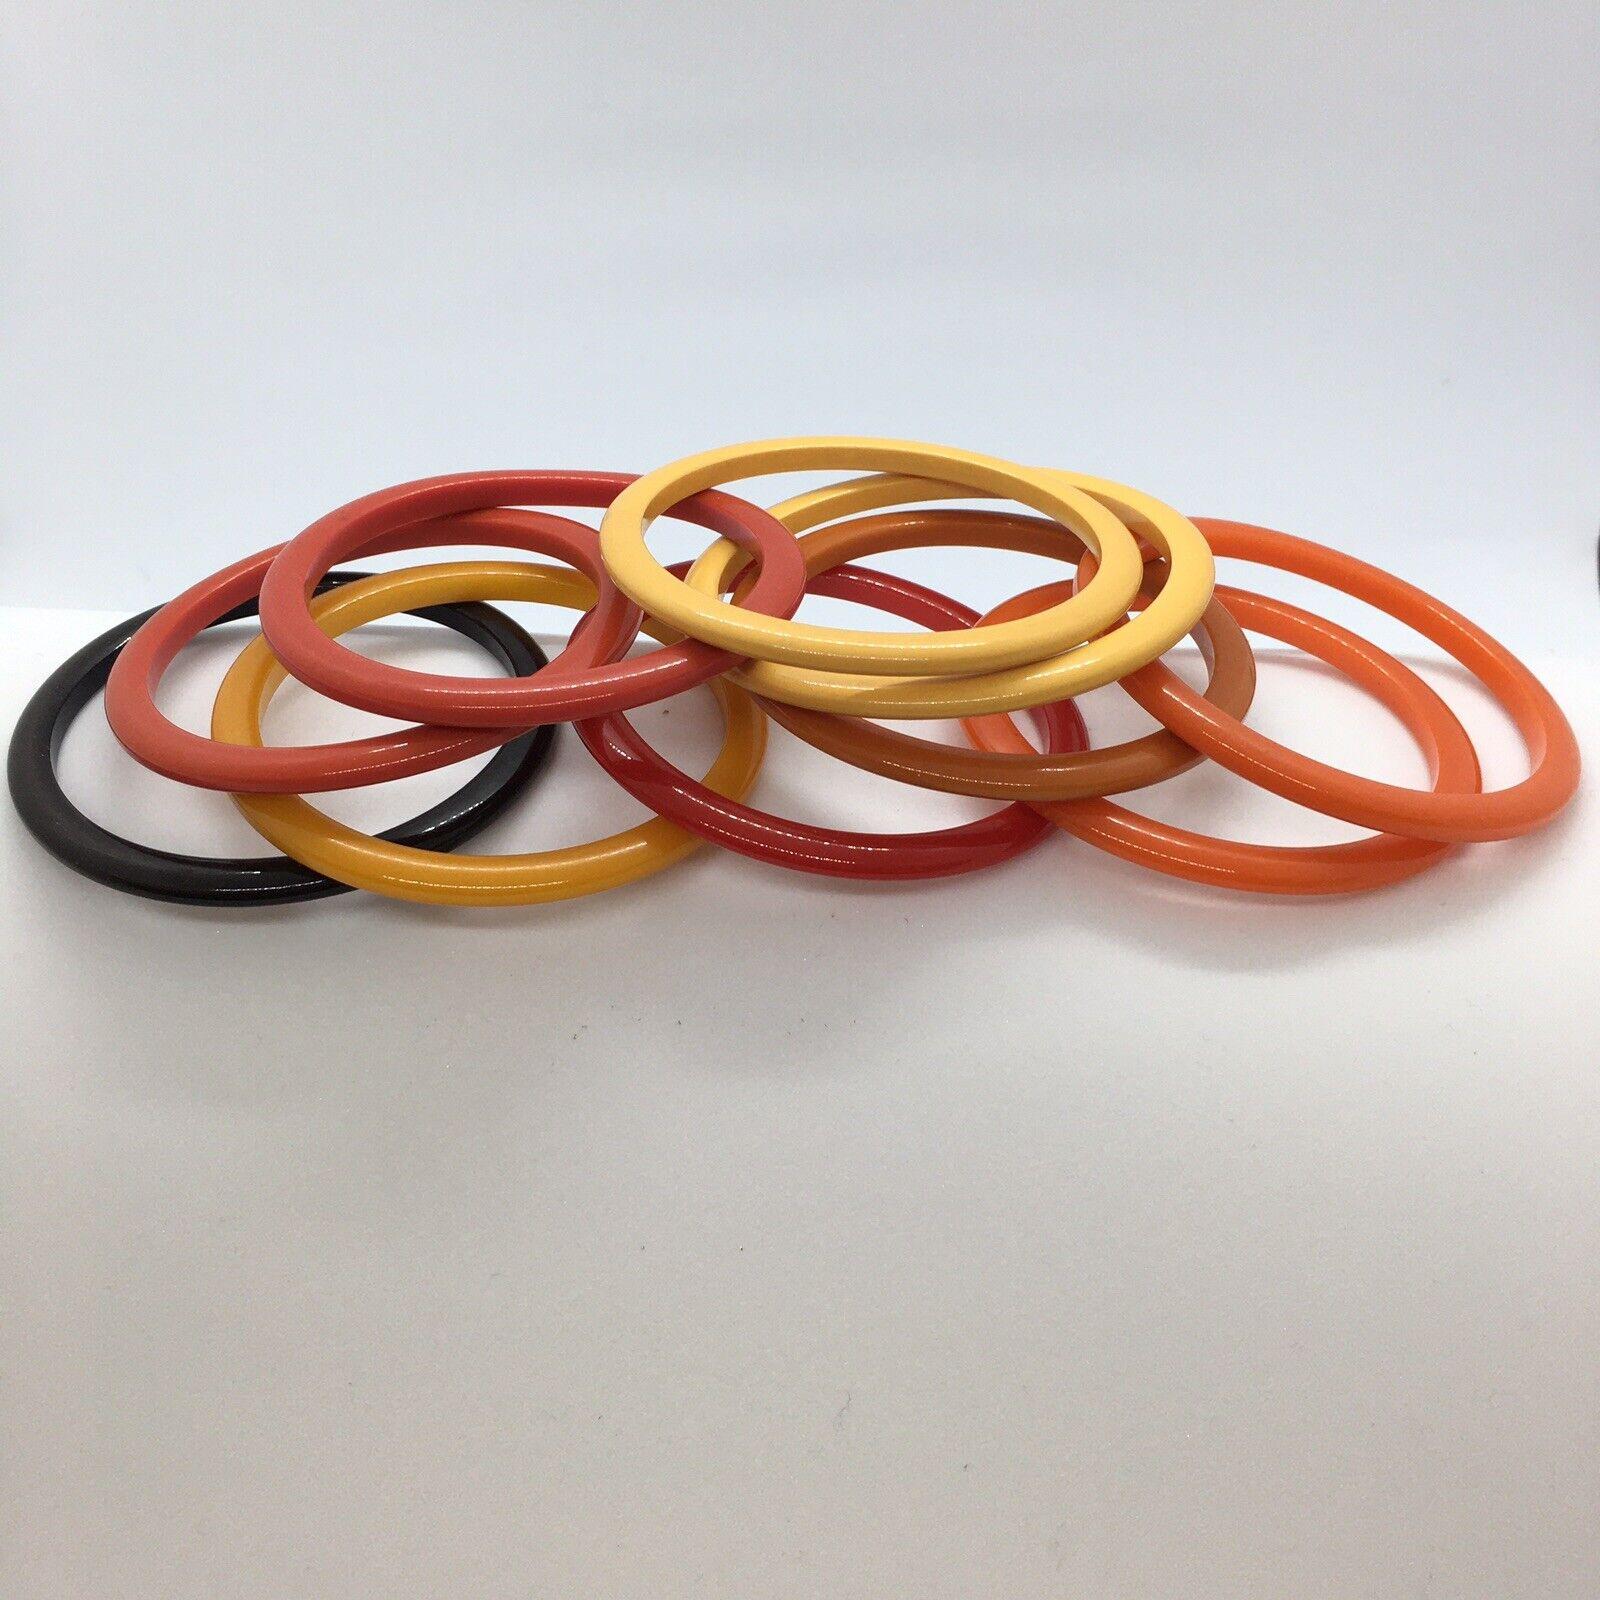 Retro 10 Pc Bakelite Bangle Bracelet Opaque Pristine Domed Sliced Rainbow
Colors Lime, Cherry, Butterscotch, Red, Orange, Russet and Black
Dimensions 2.5 inch inner Diameter, measuring 7.85 inch wrist size, 3 inch Outer diameter, each are 1/8 inch